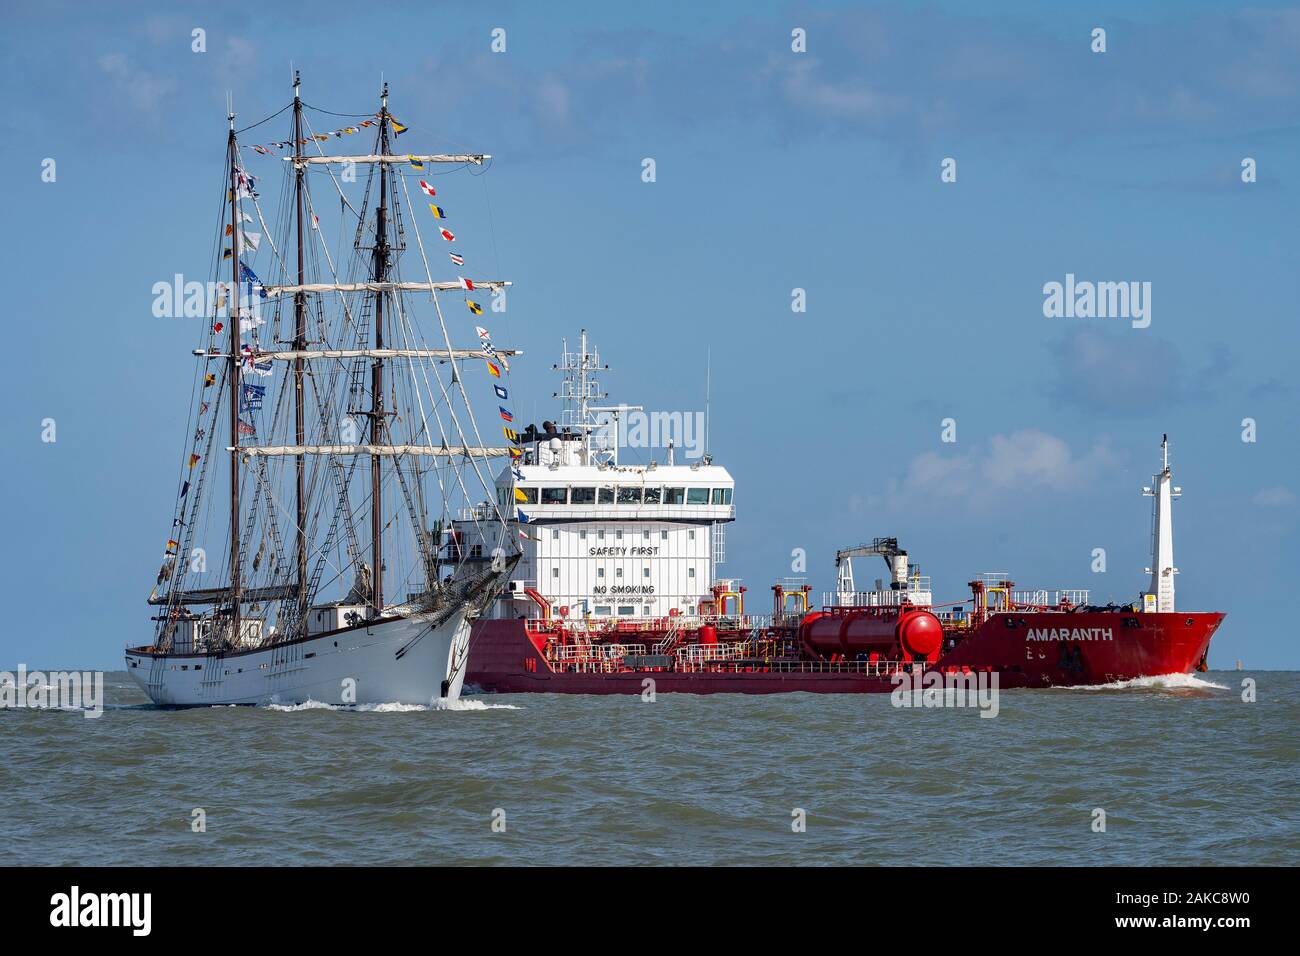 France, Seine Maritime, Le Havre, Armada of Rouen 2019, the Marité race with the Amaranth tanker in the Seine Bay Stock Photo